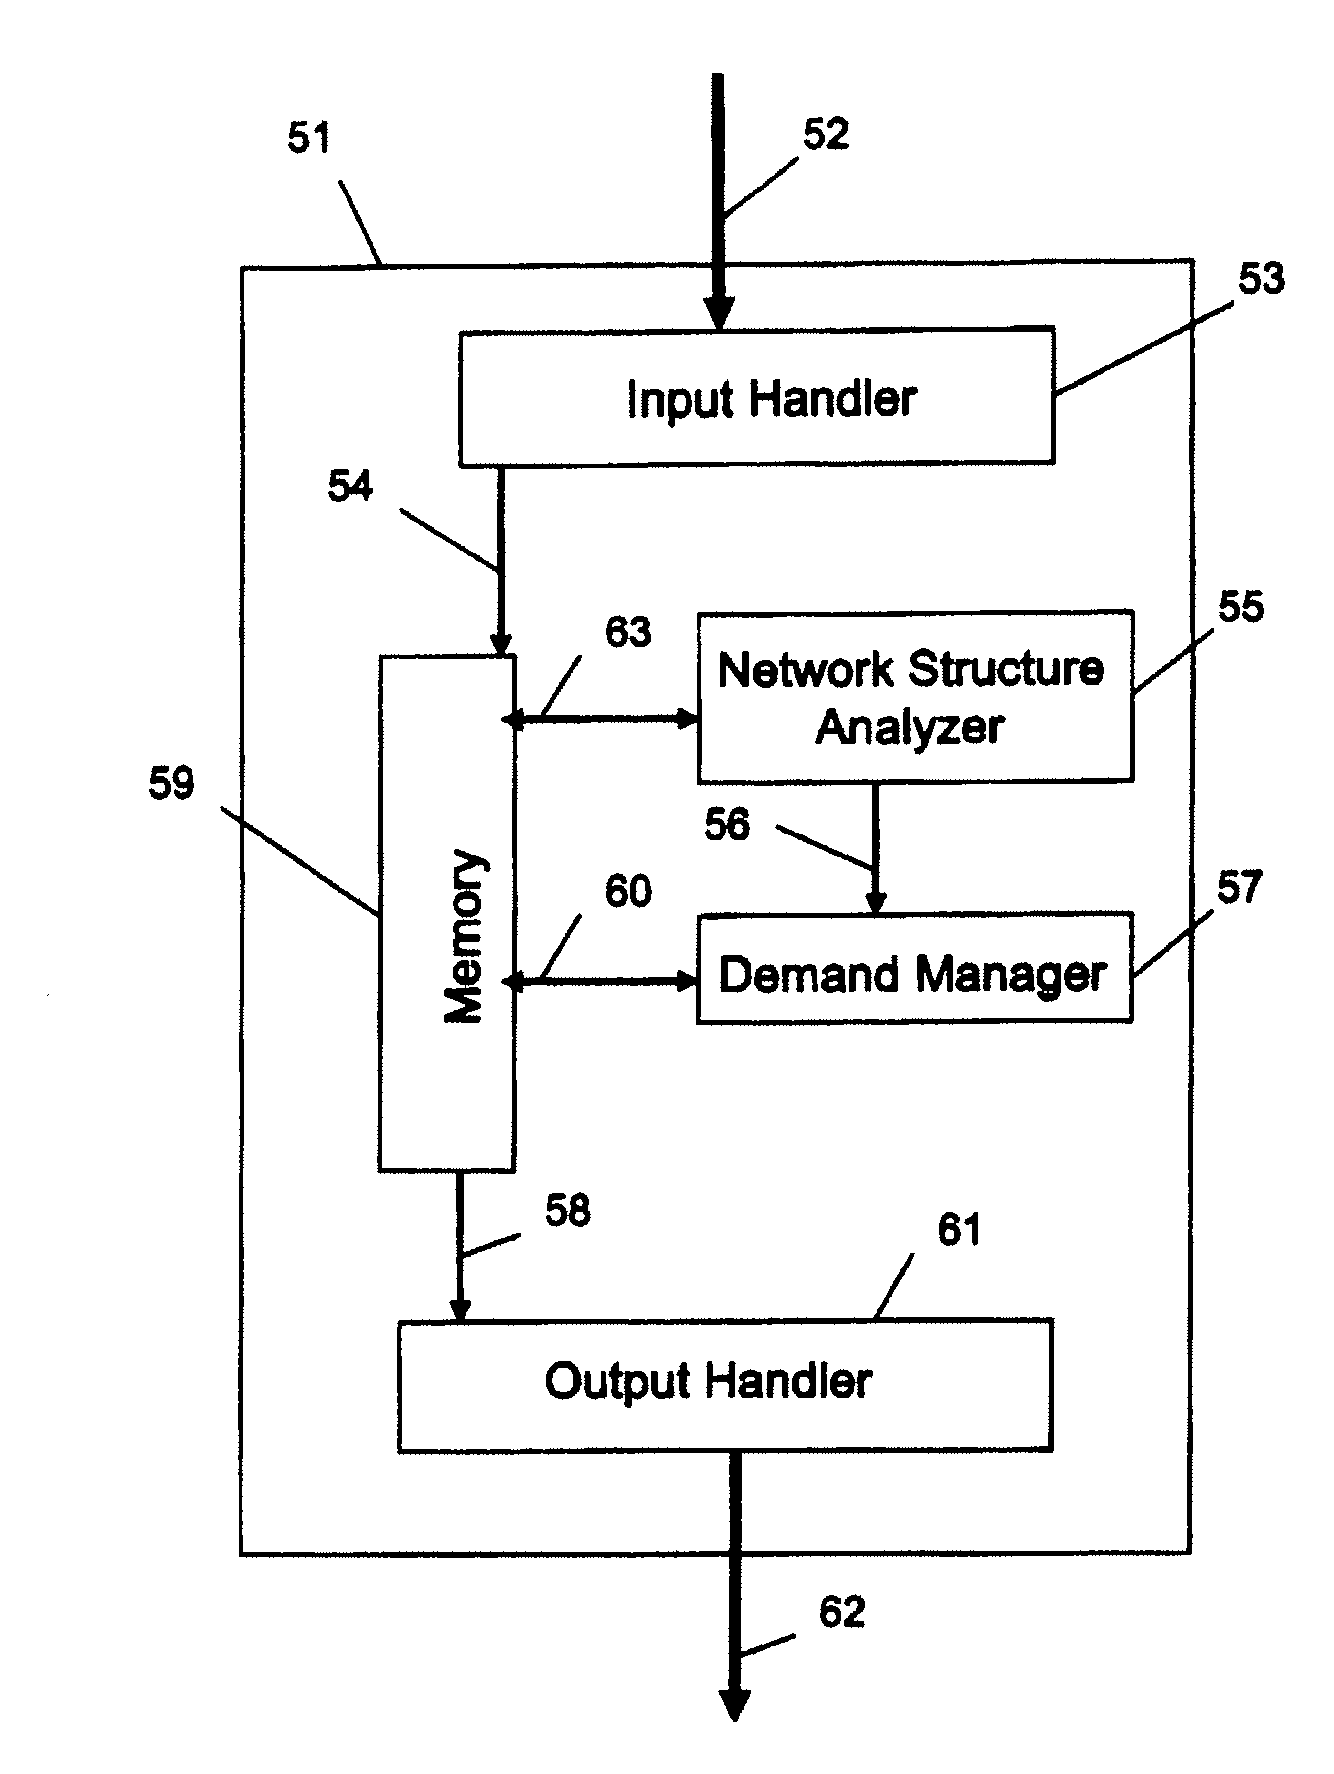 Method of Optimizing Routing of Demands in a Network